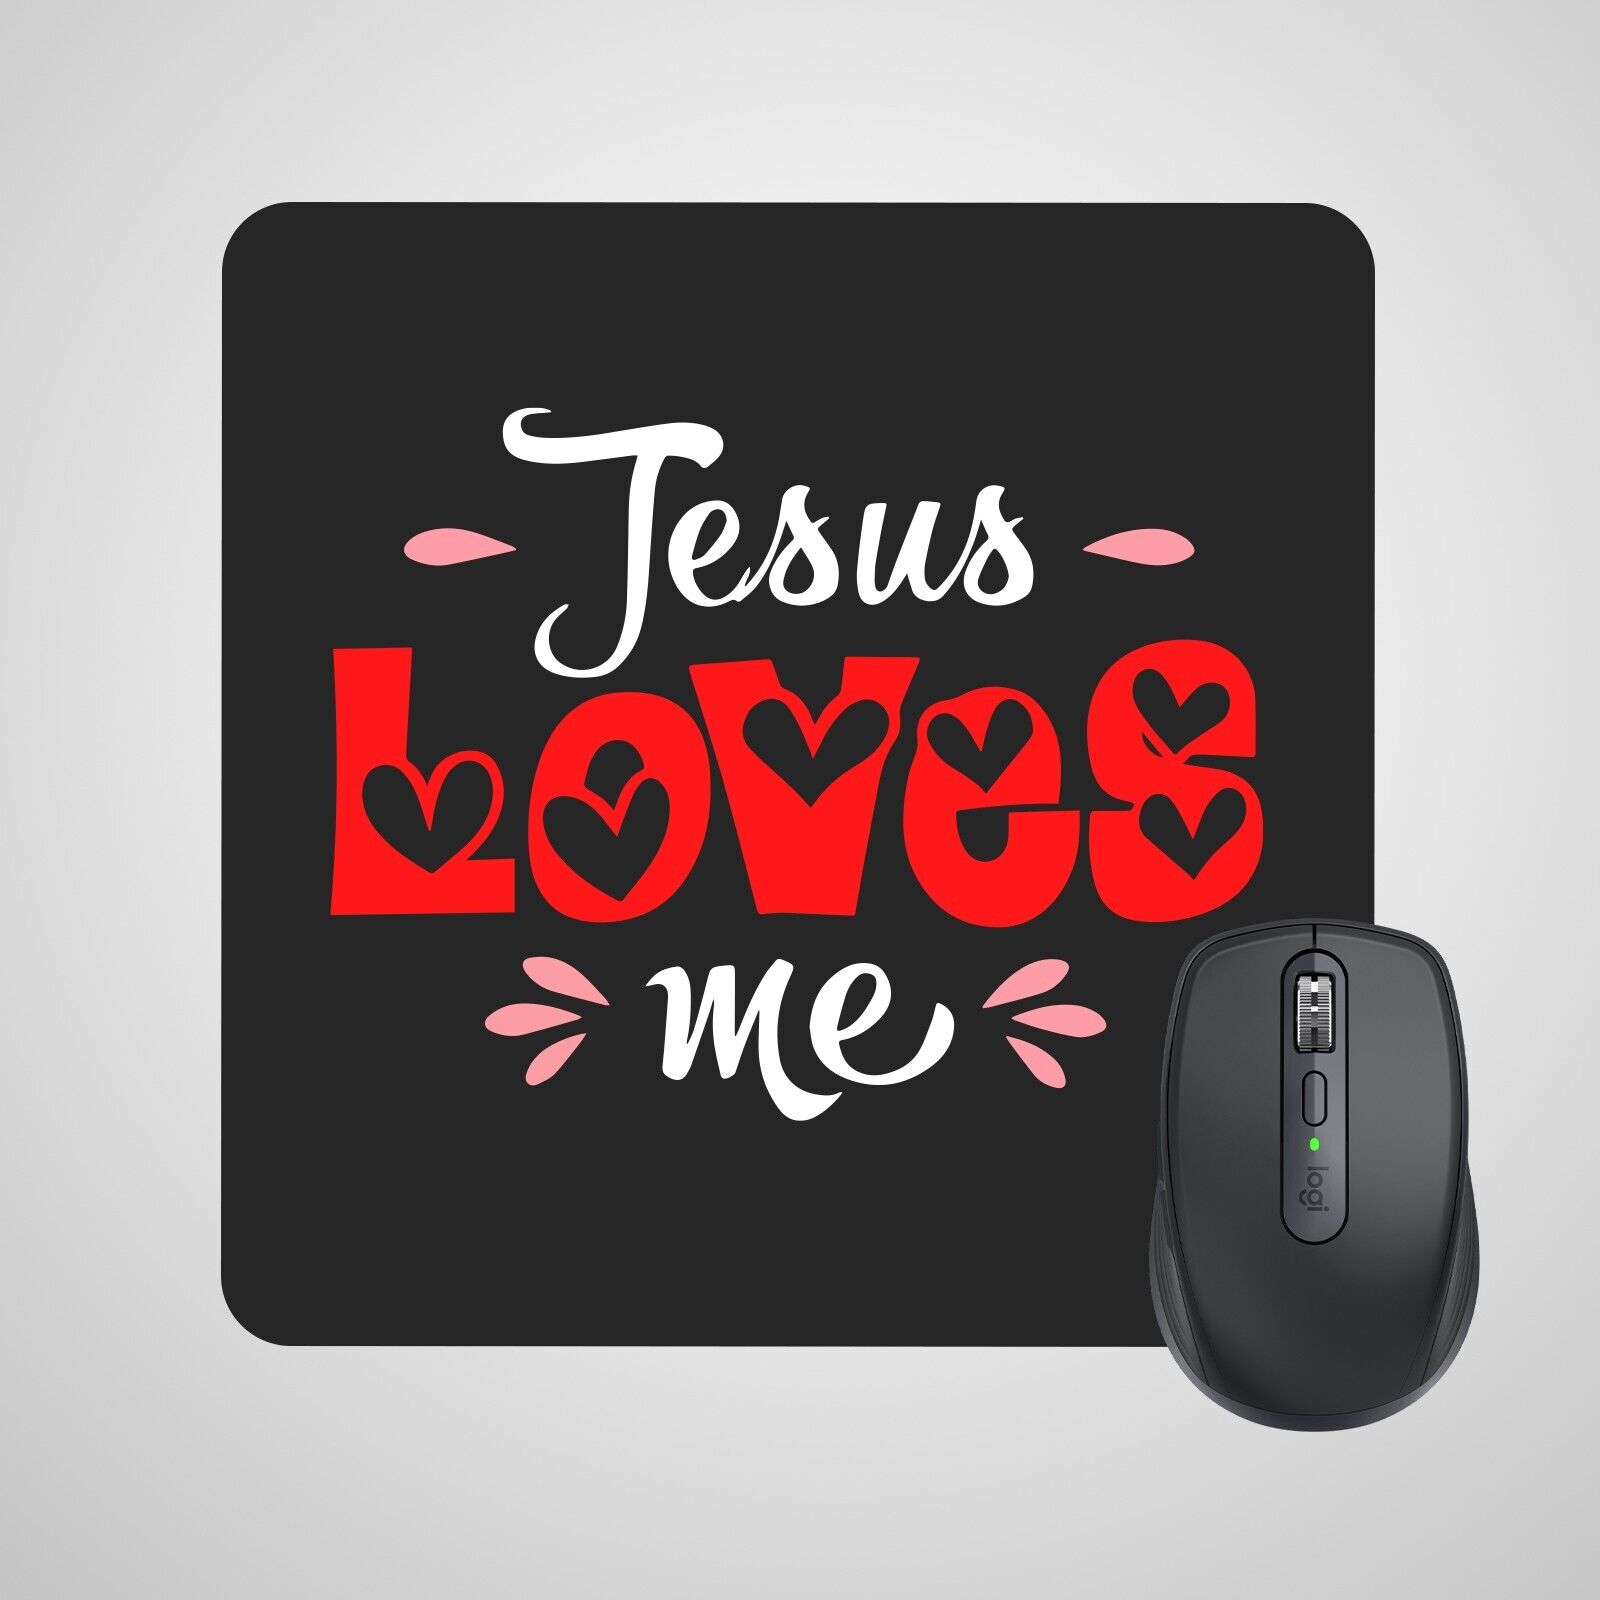 Jesus Love Christian Religious Computer Gaming Mousepad Office Labtop Gift USA